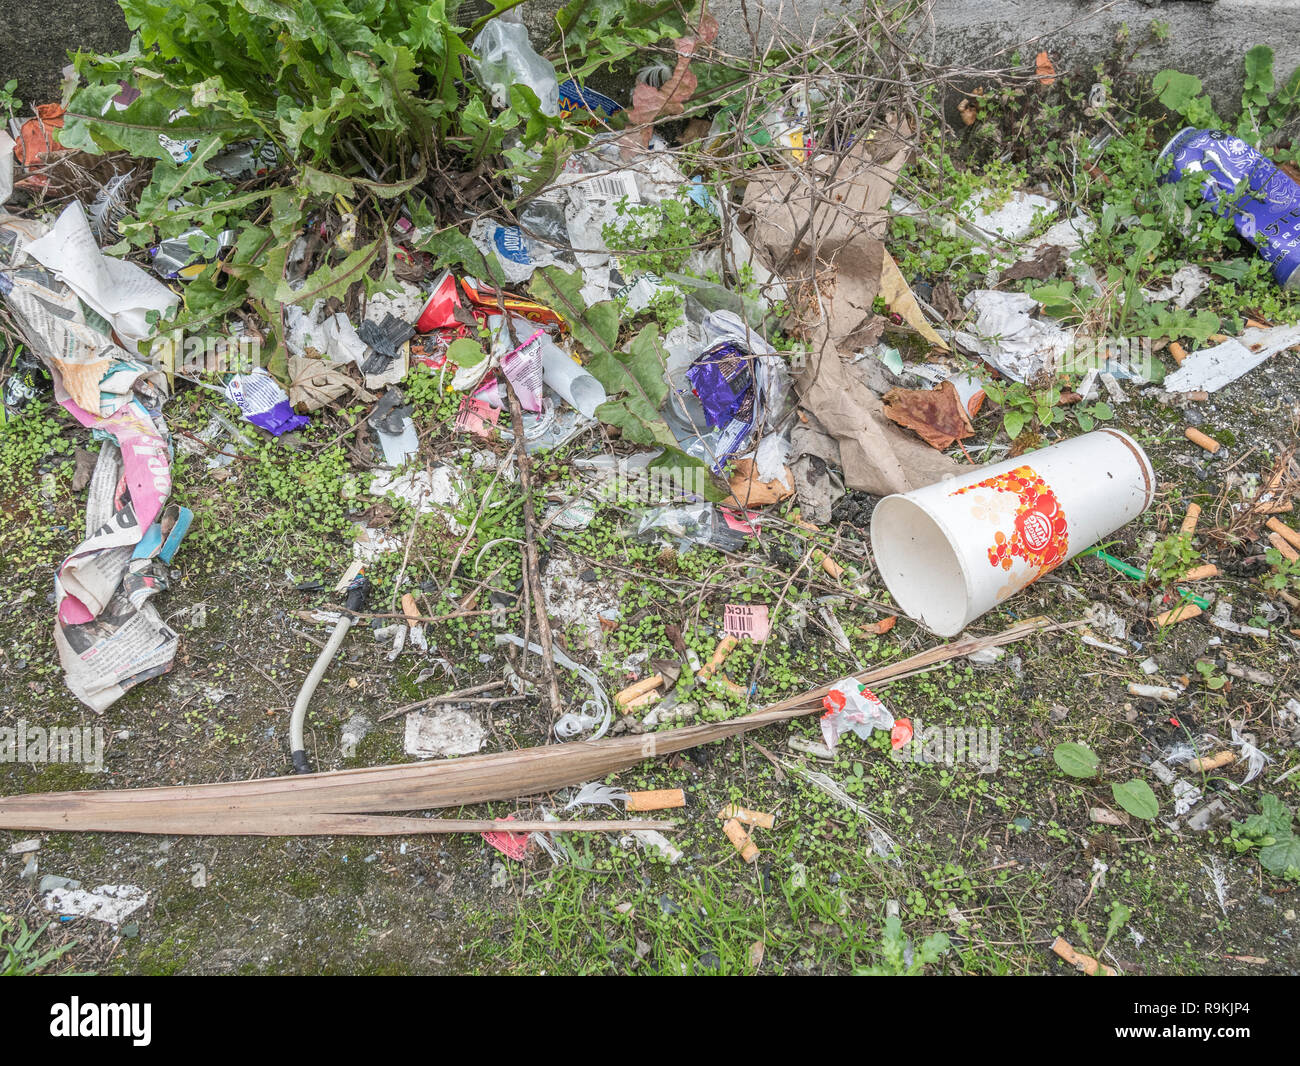 Plastic rubbish discarded in urban backstreet. For plastic pollution, war on plastic waste, plastic rubbish, takeaway food packaging. Stock Photo